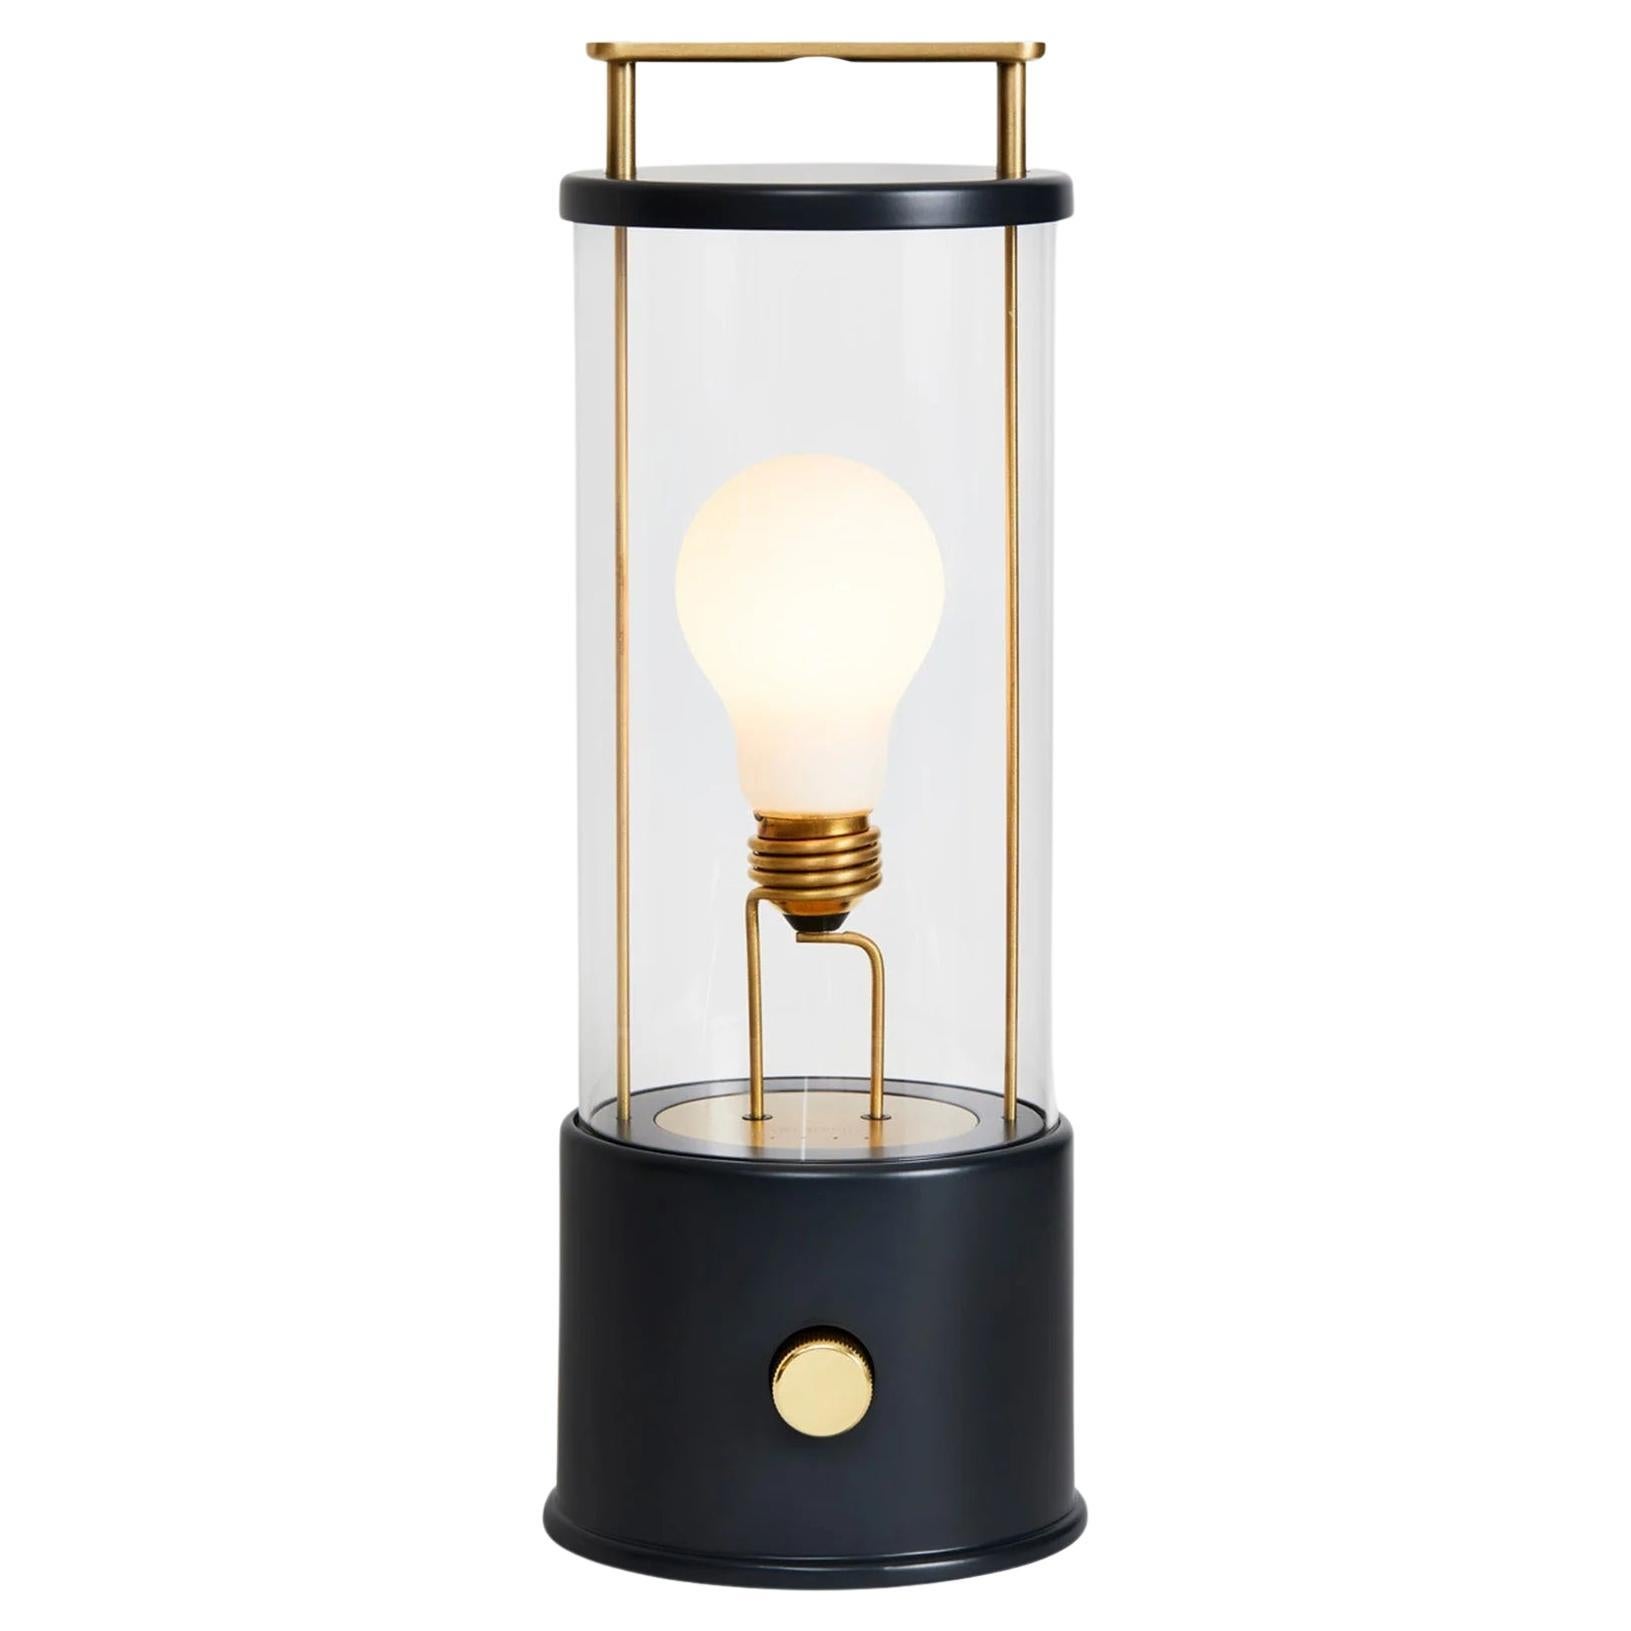 'The Muse' Portable Lamp by Farrow & Ball x Tala in Hackles Black